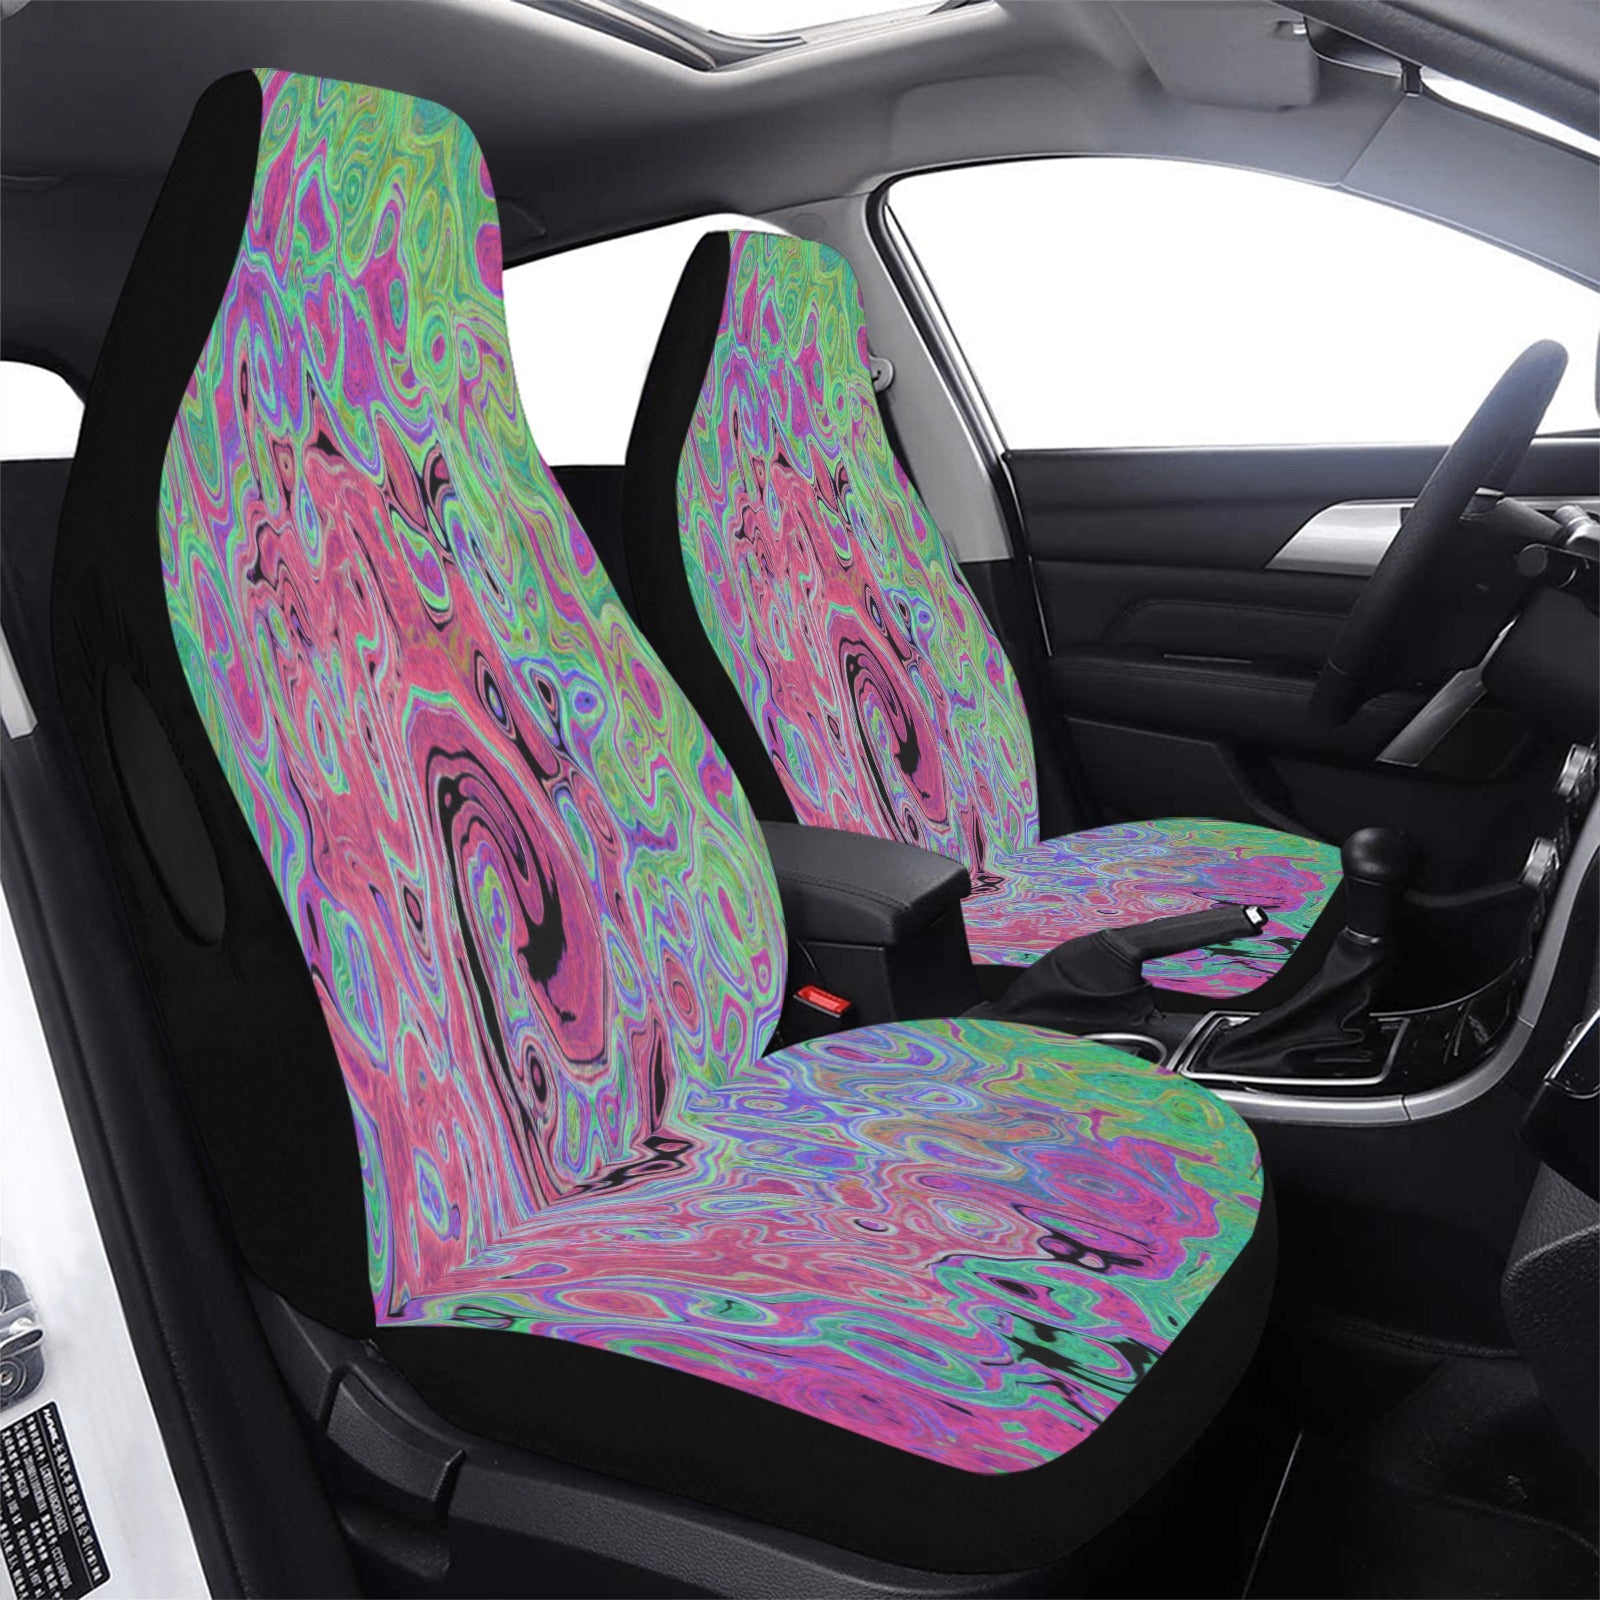 Car Seat Covers, Pink and Lime Green Groovy Abstract Retro Swirl